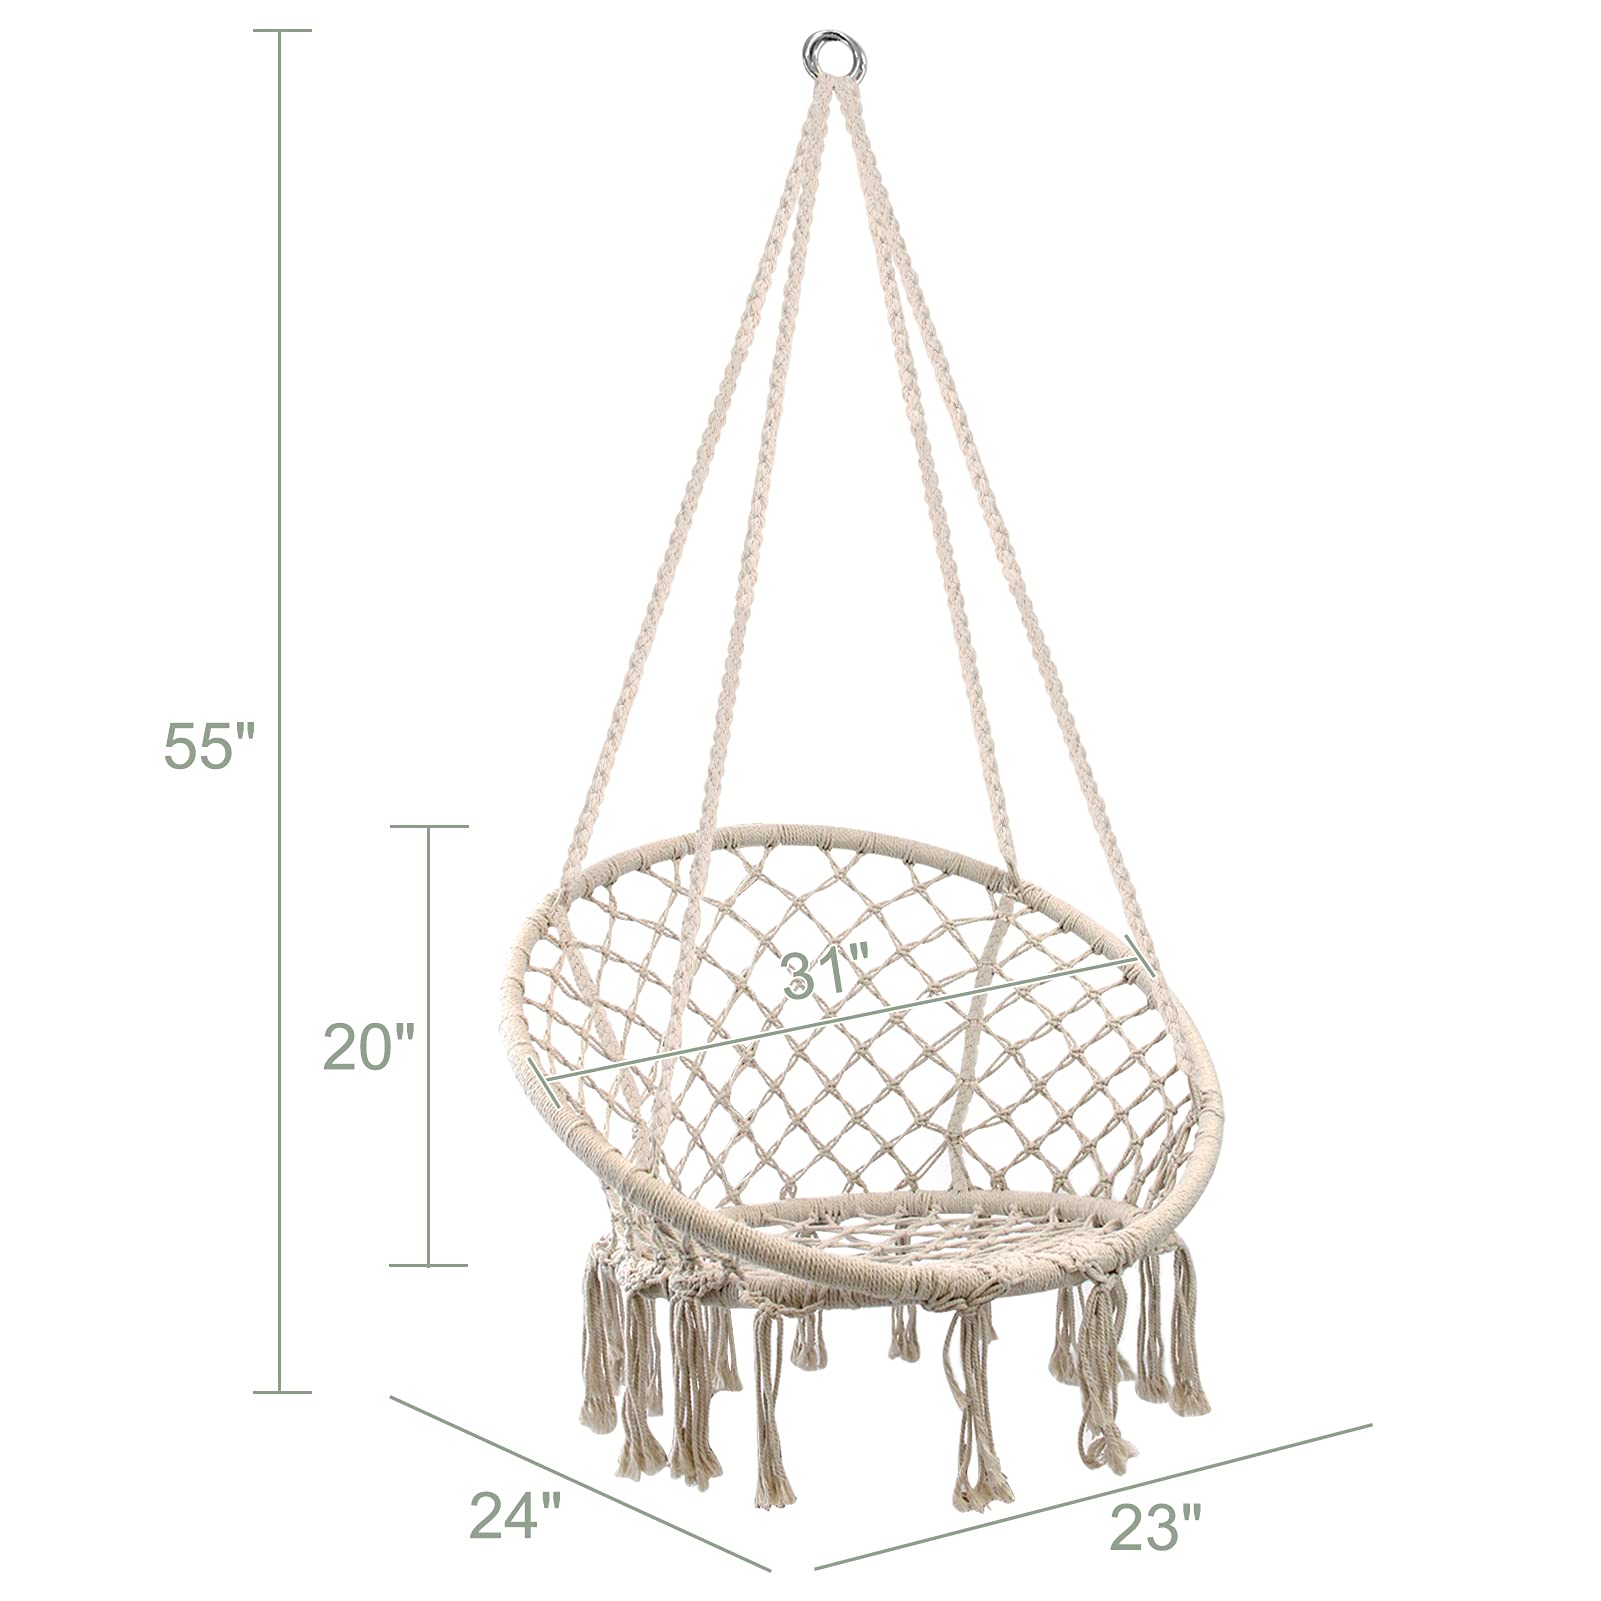 WBHome Hammock Chair Swing w/Hardware Kit, Cotton Rope Hanging Macrame Swing Chair for Bedroom, Patio, Yard, Indoor, Outdoor, Max Weight 265 Lbs (Beige)